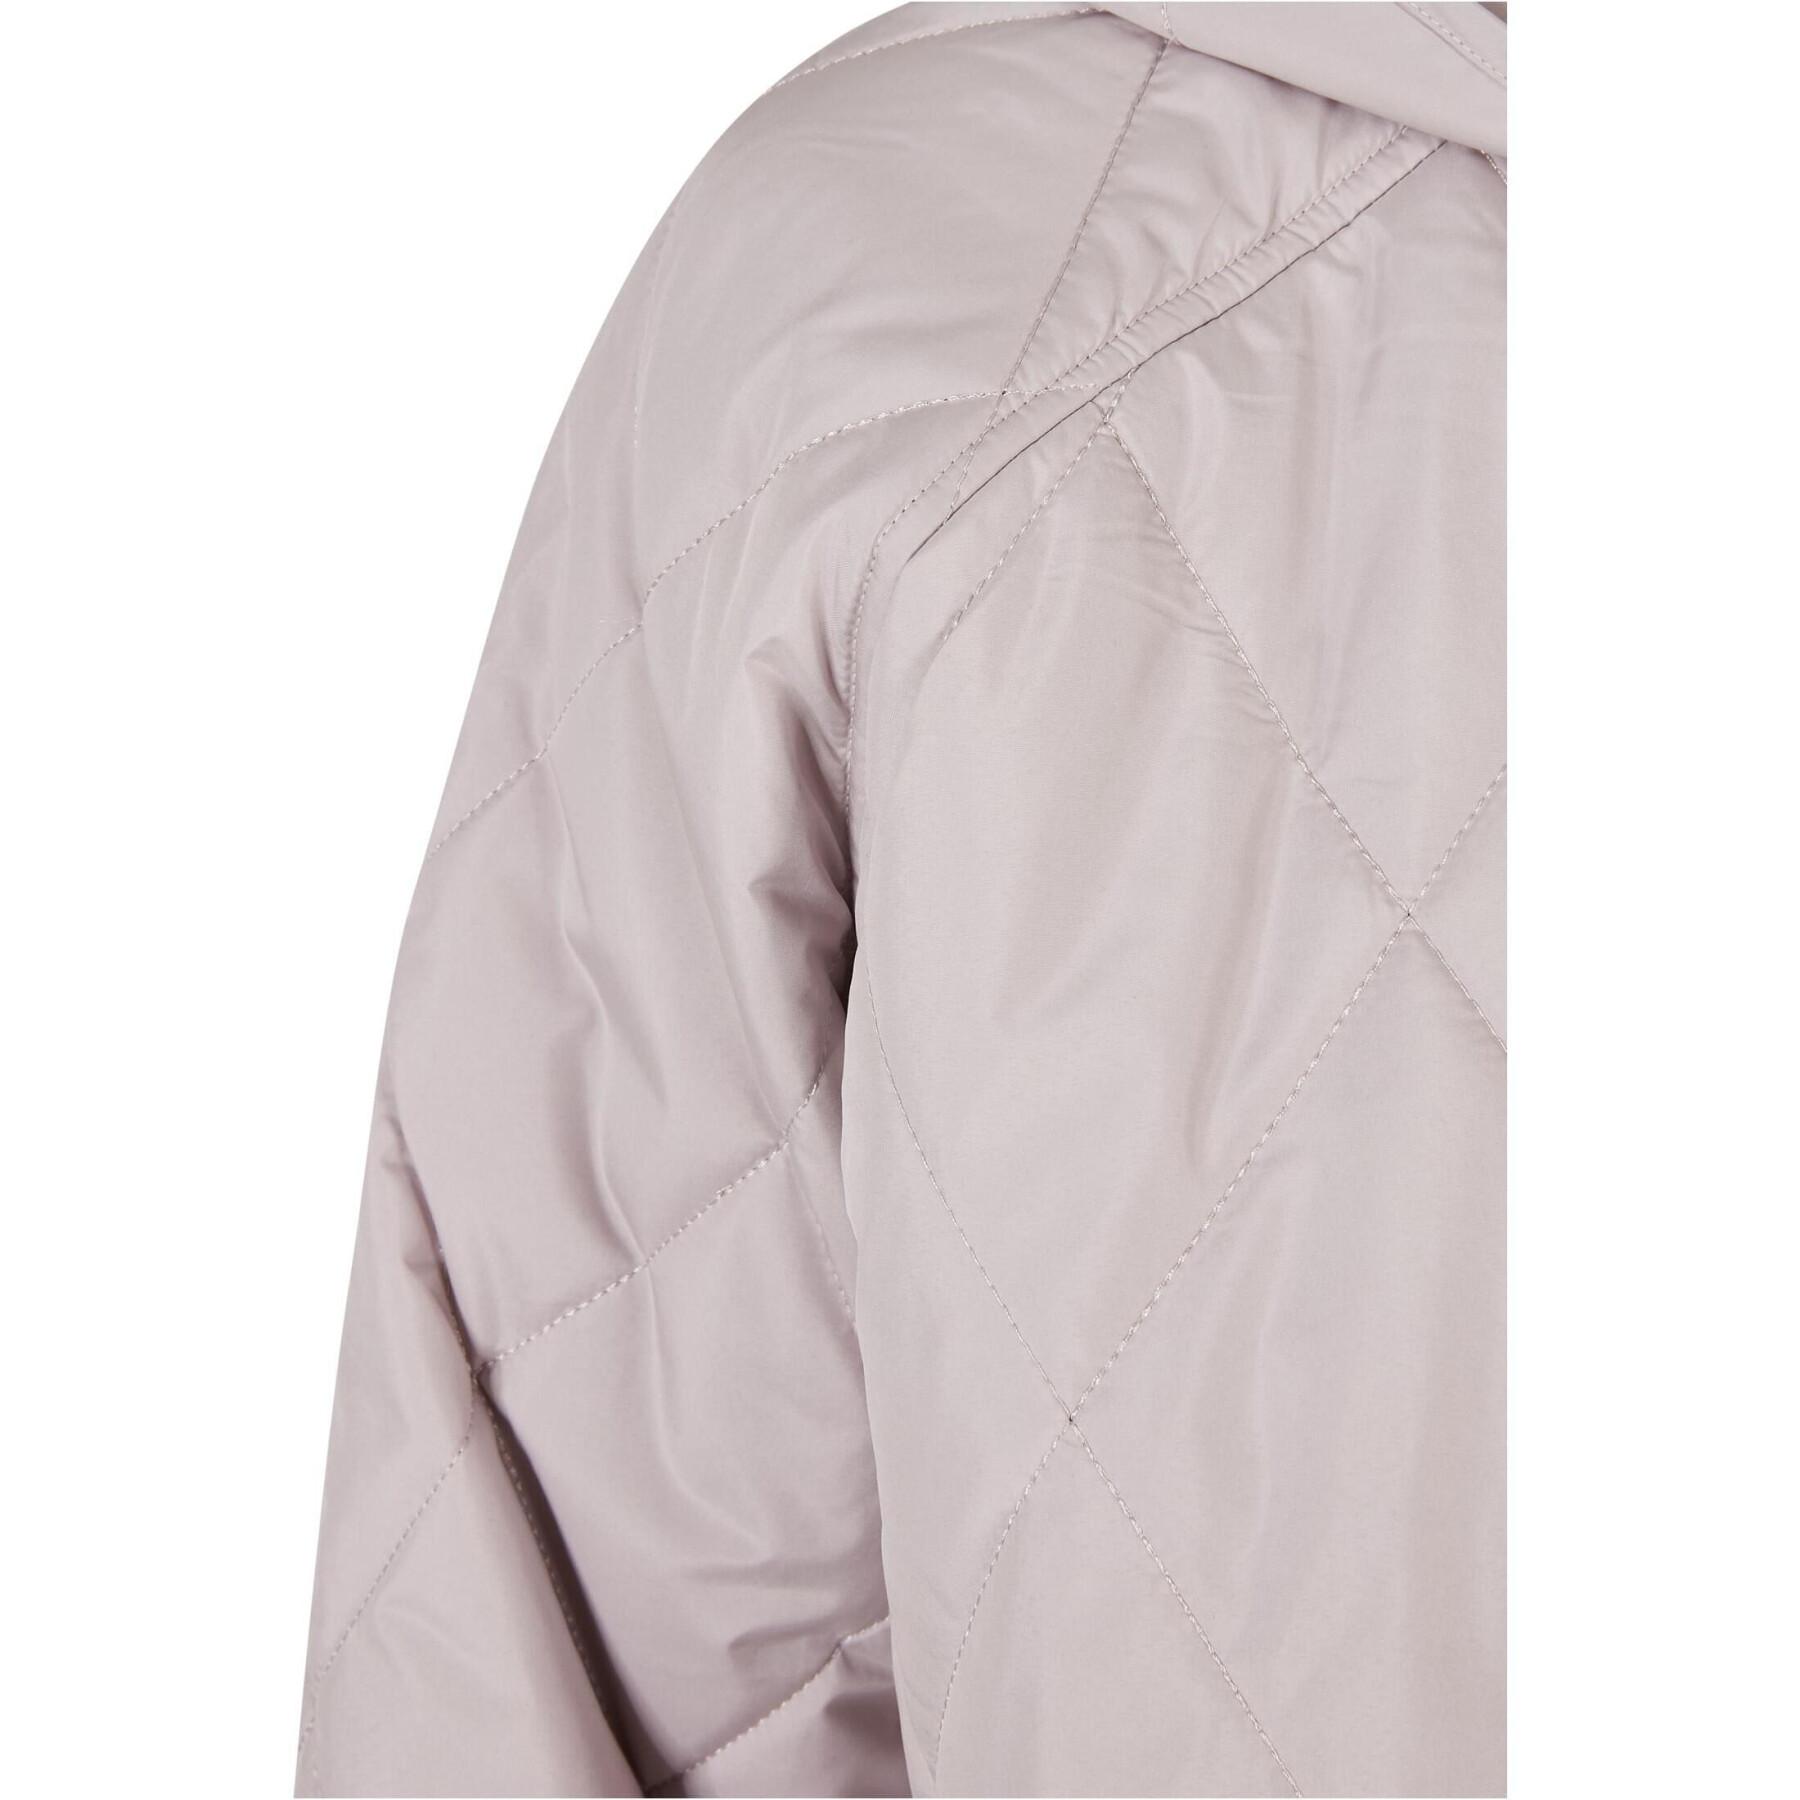 Women's hooded parka Urban Classics Oversized Diamond Quilted